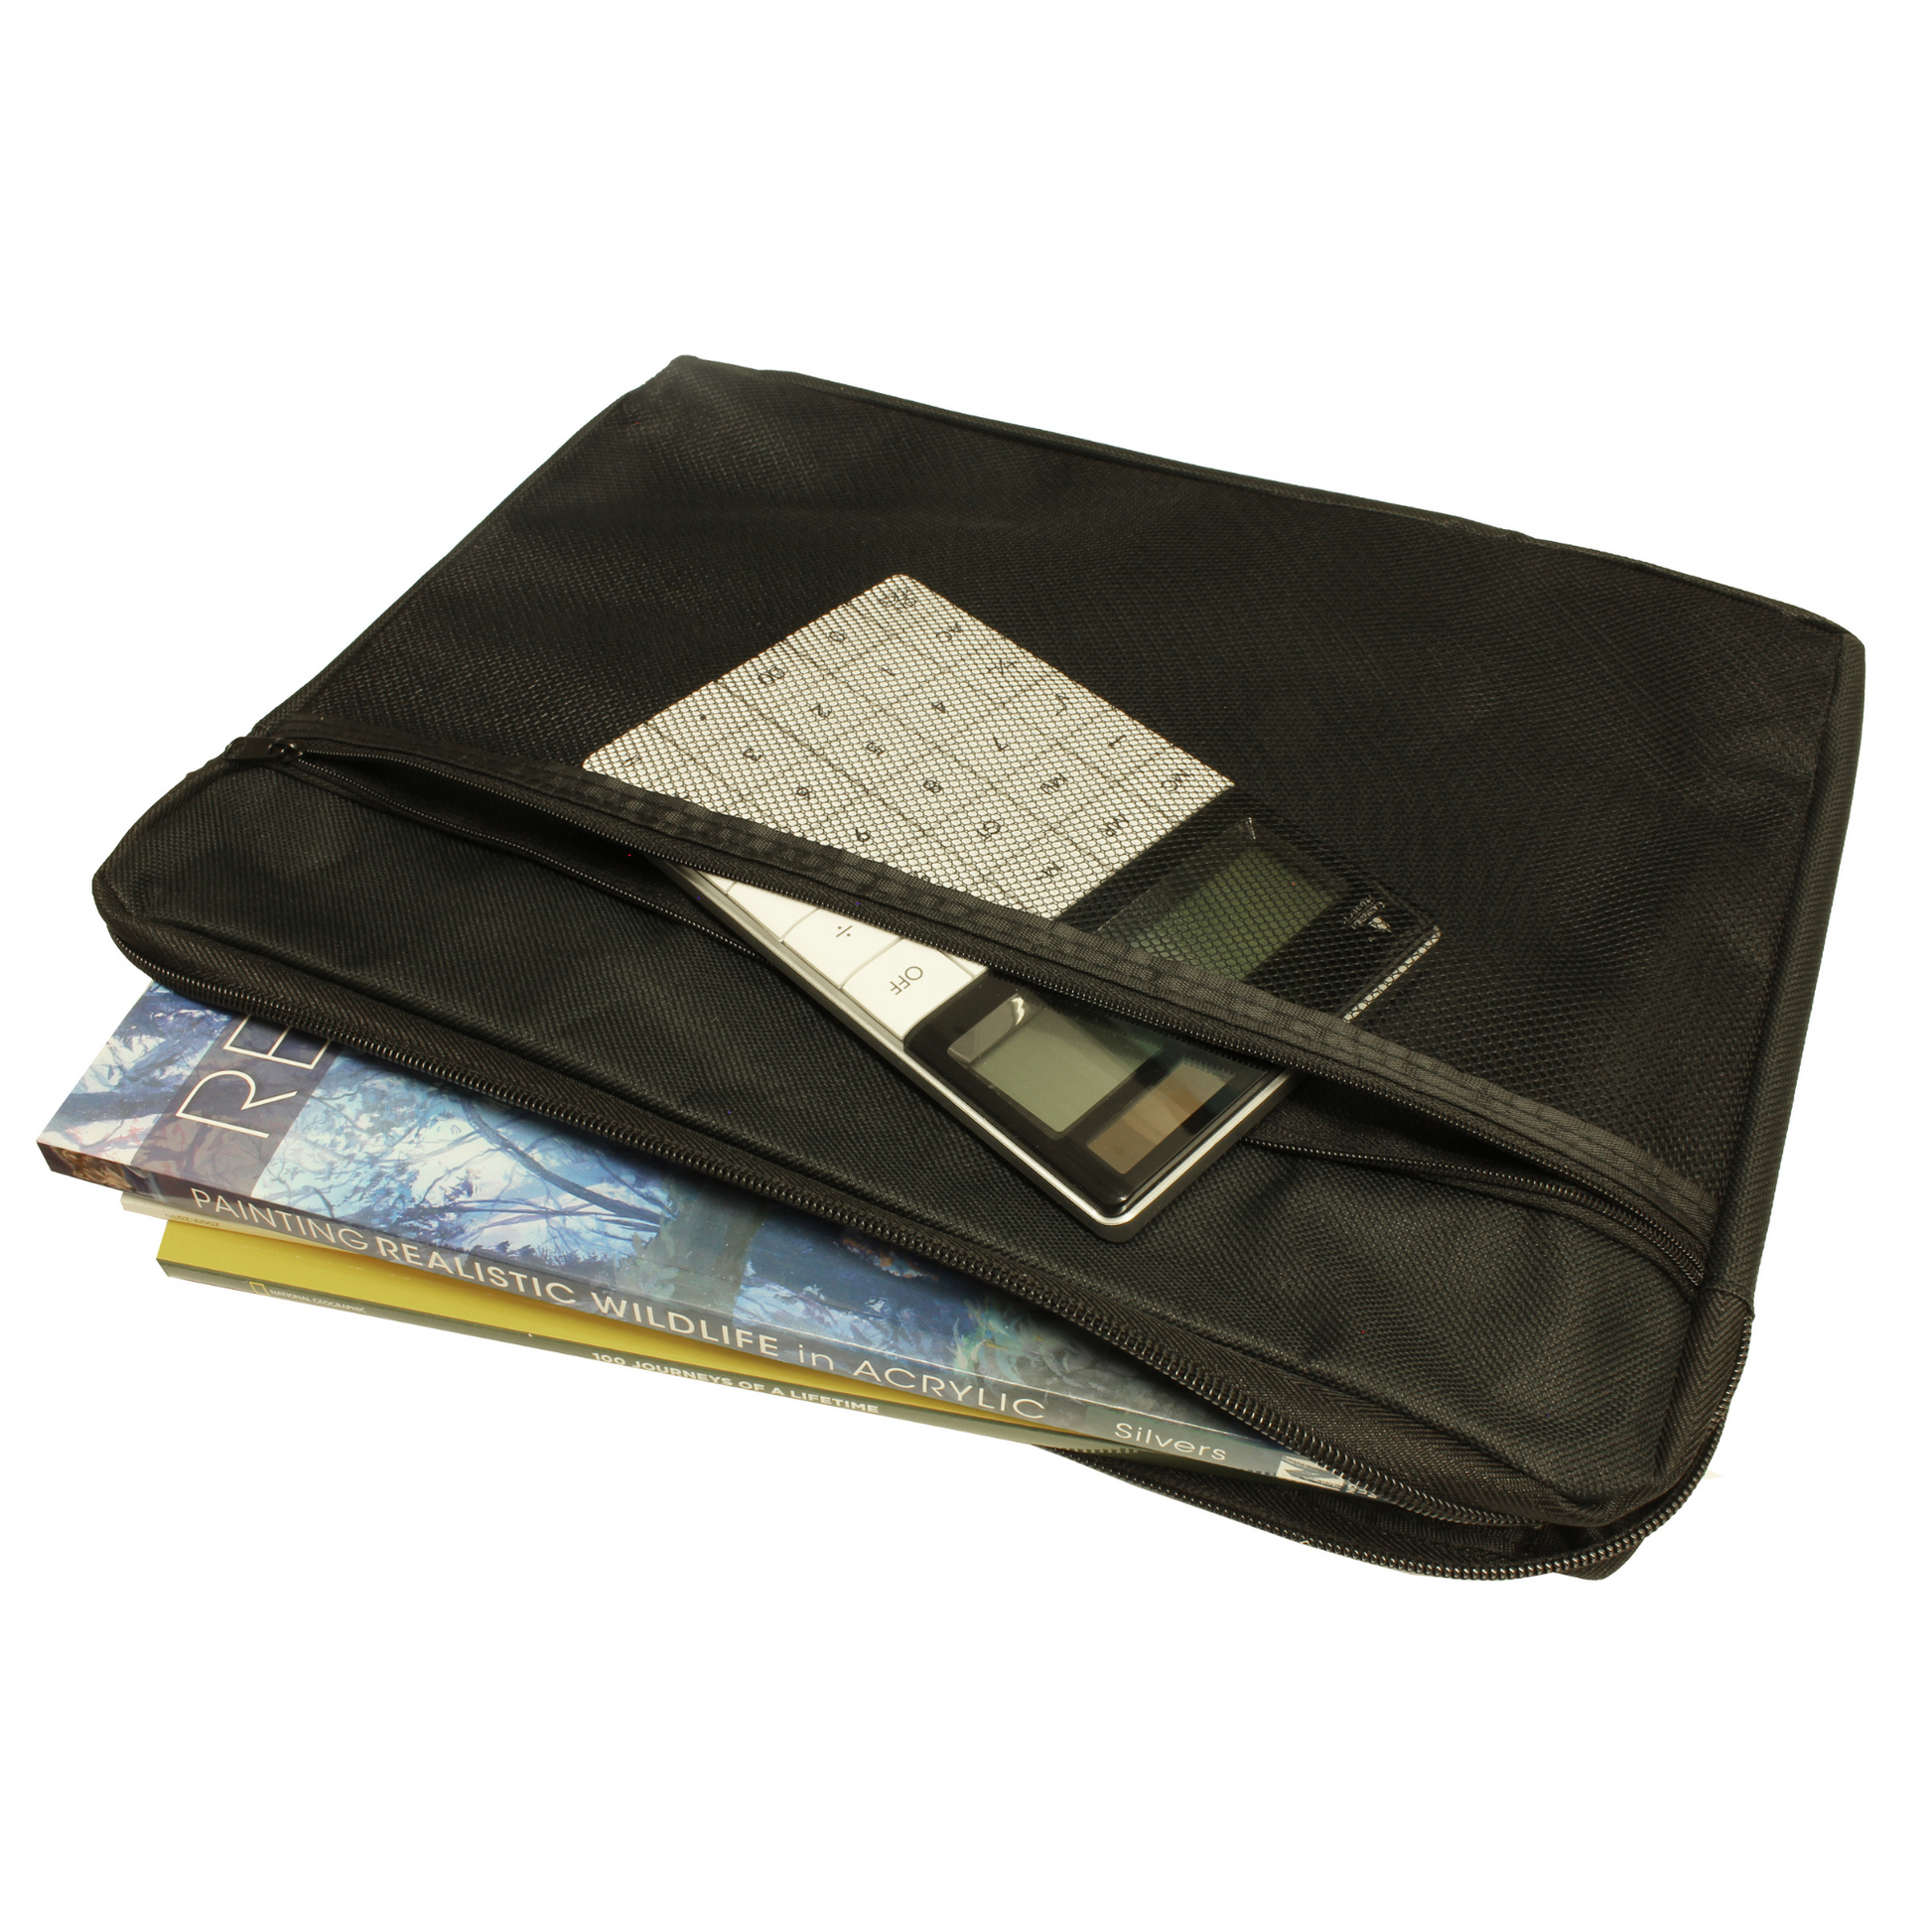 A partially open black A4 canvas document bag with a zipper, revealing its contents including a calculator, a mobile phone, and art instruction books titled '50 Journeys' and 'Painting Realistic Wildlife in Acrylic', highlighting the bag's storage capability.